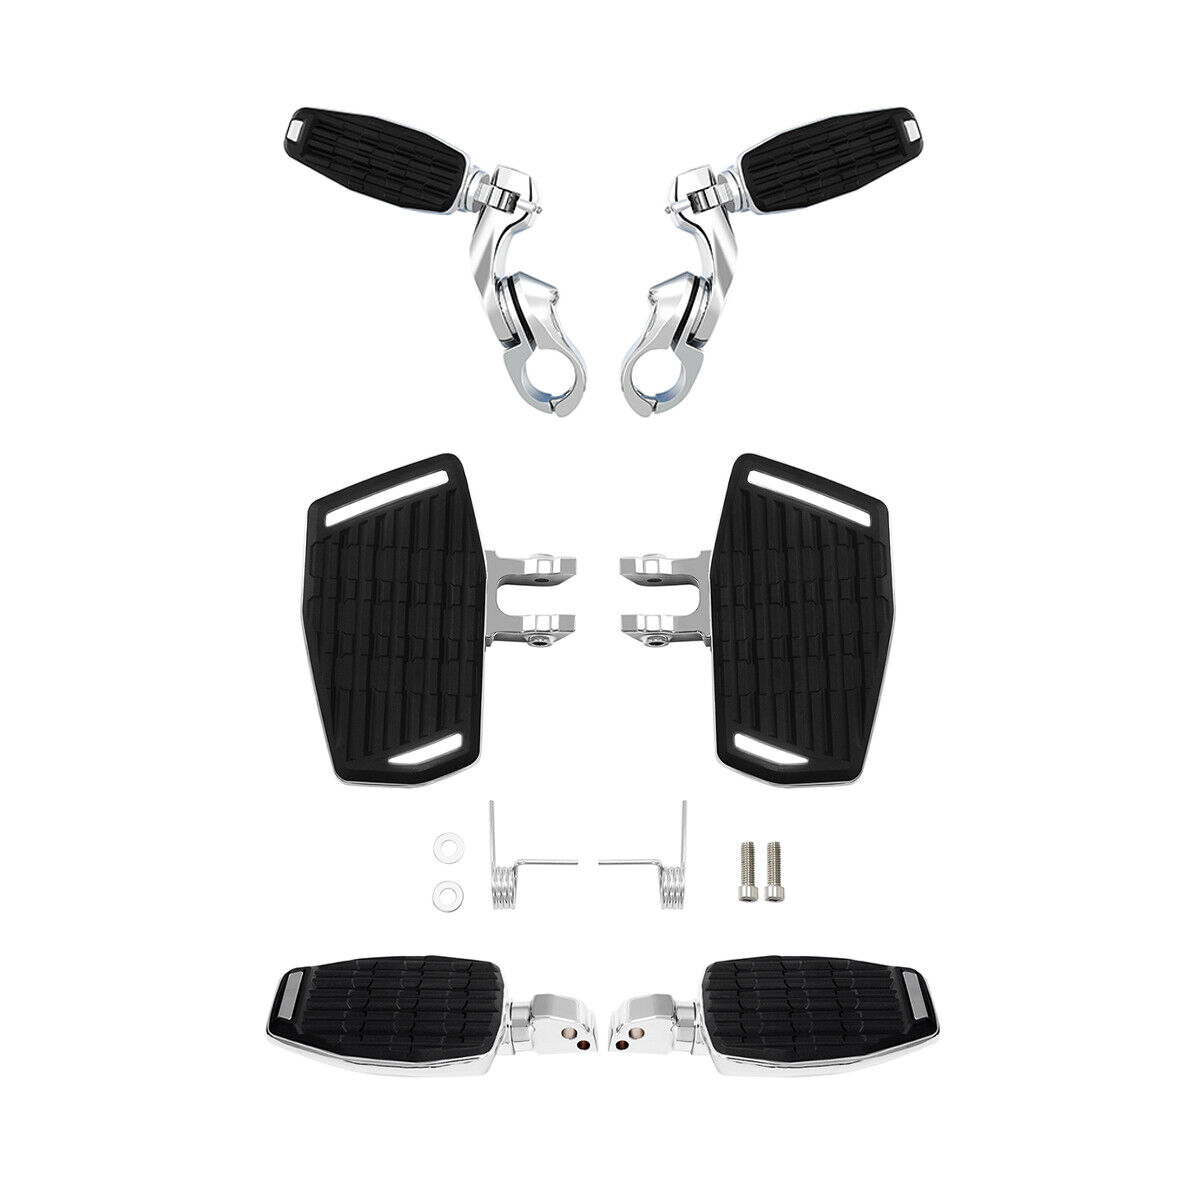 Driver Passenger Footboards & Footpegs Mount For BMW R18 Transcontinental 21-24